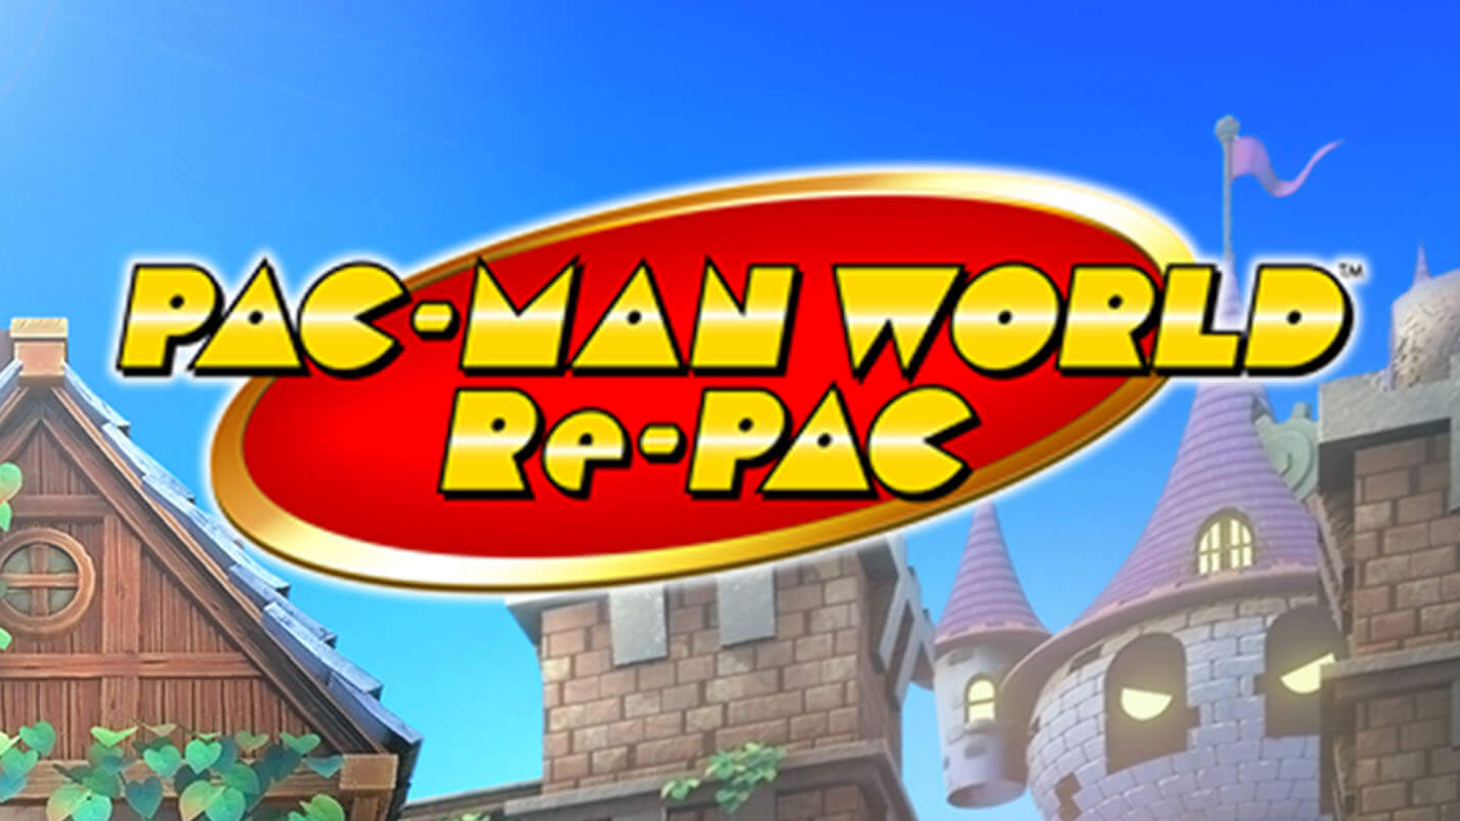 Pac-World is coming back, and here’s the first big chunk of gameplay